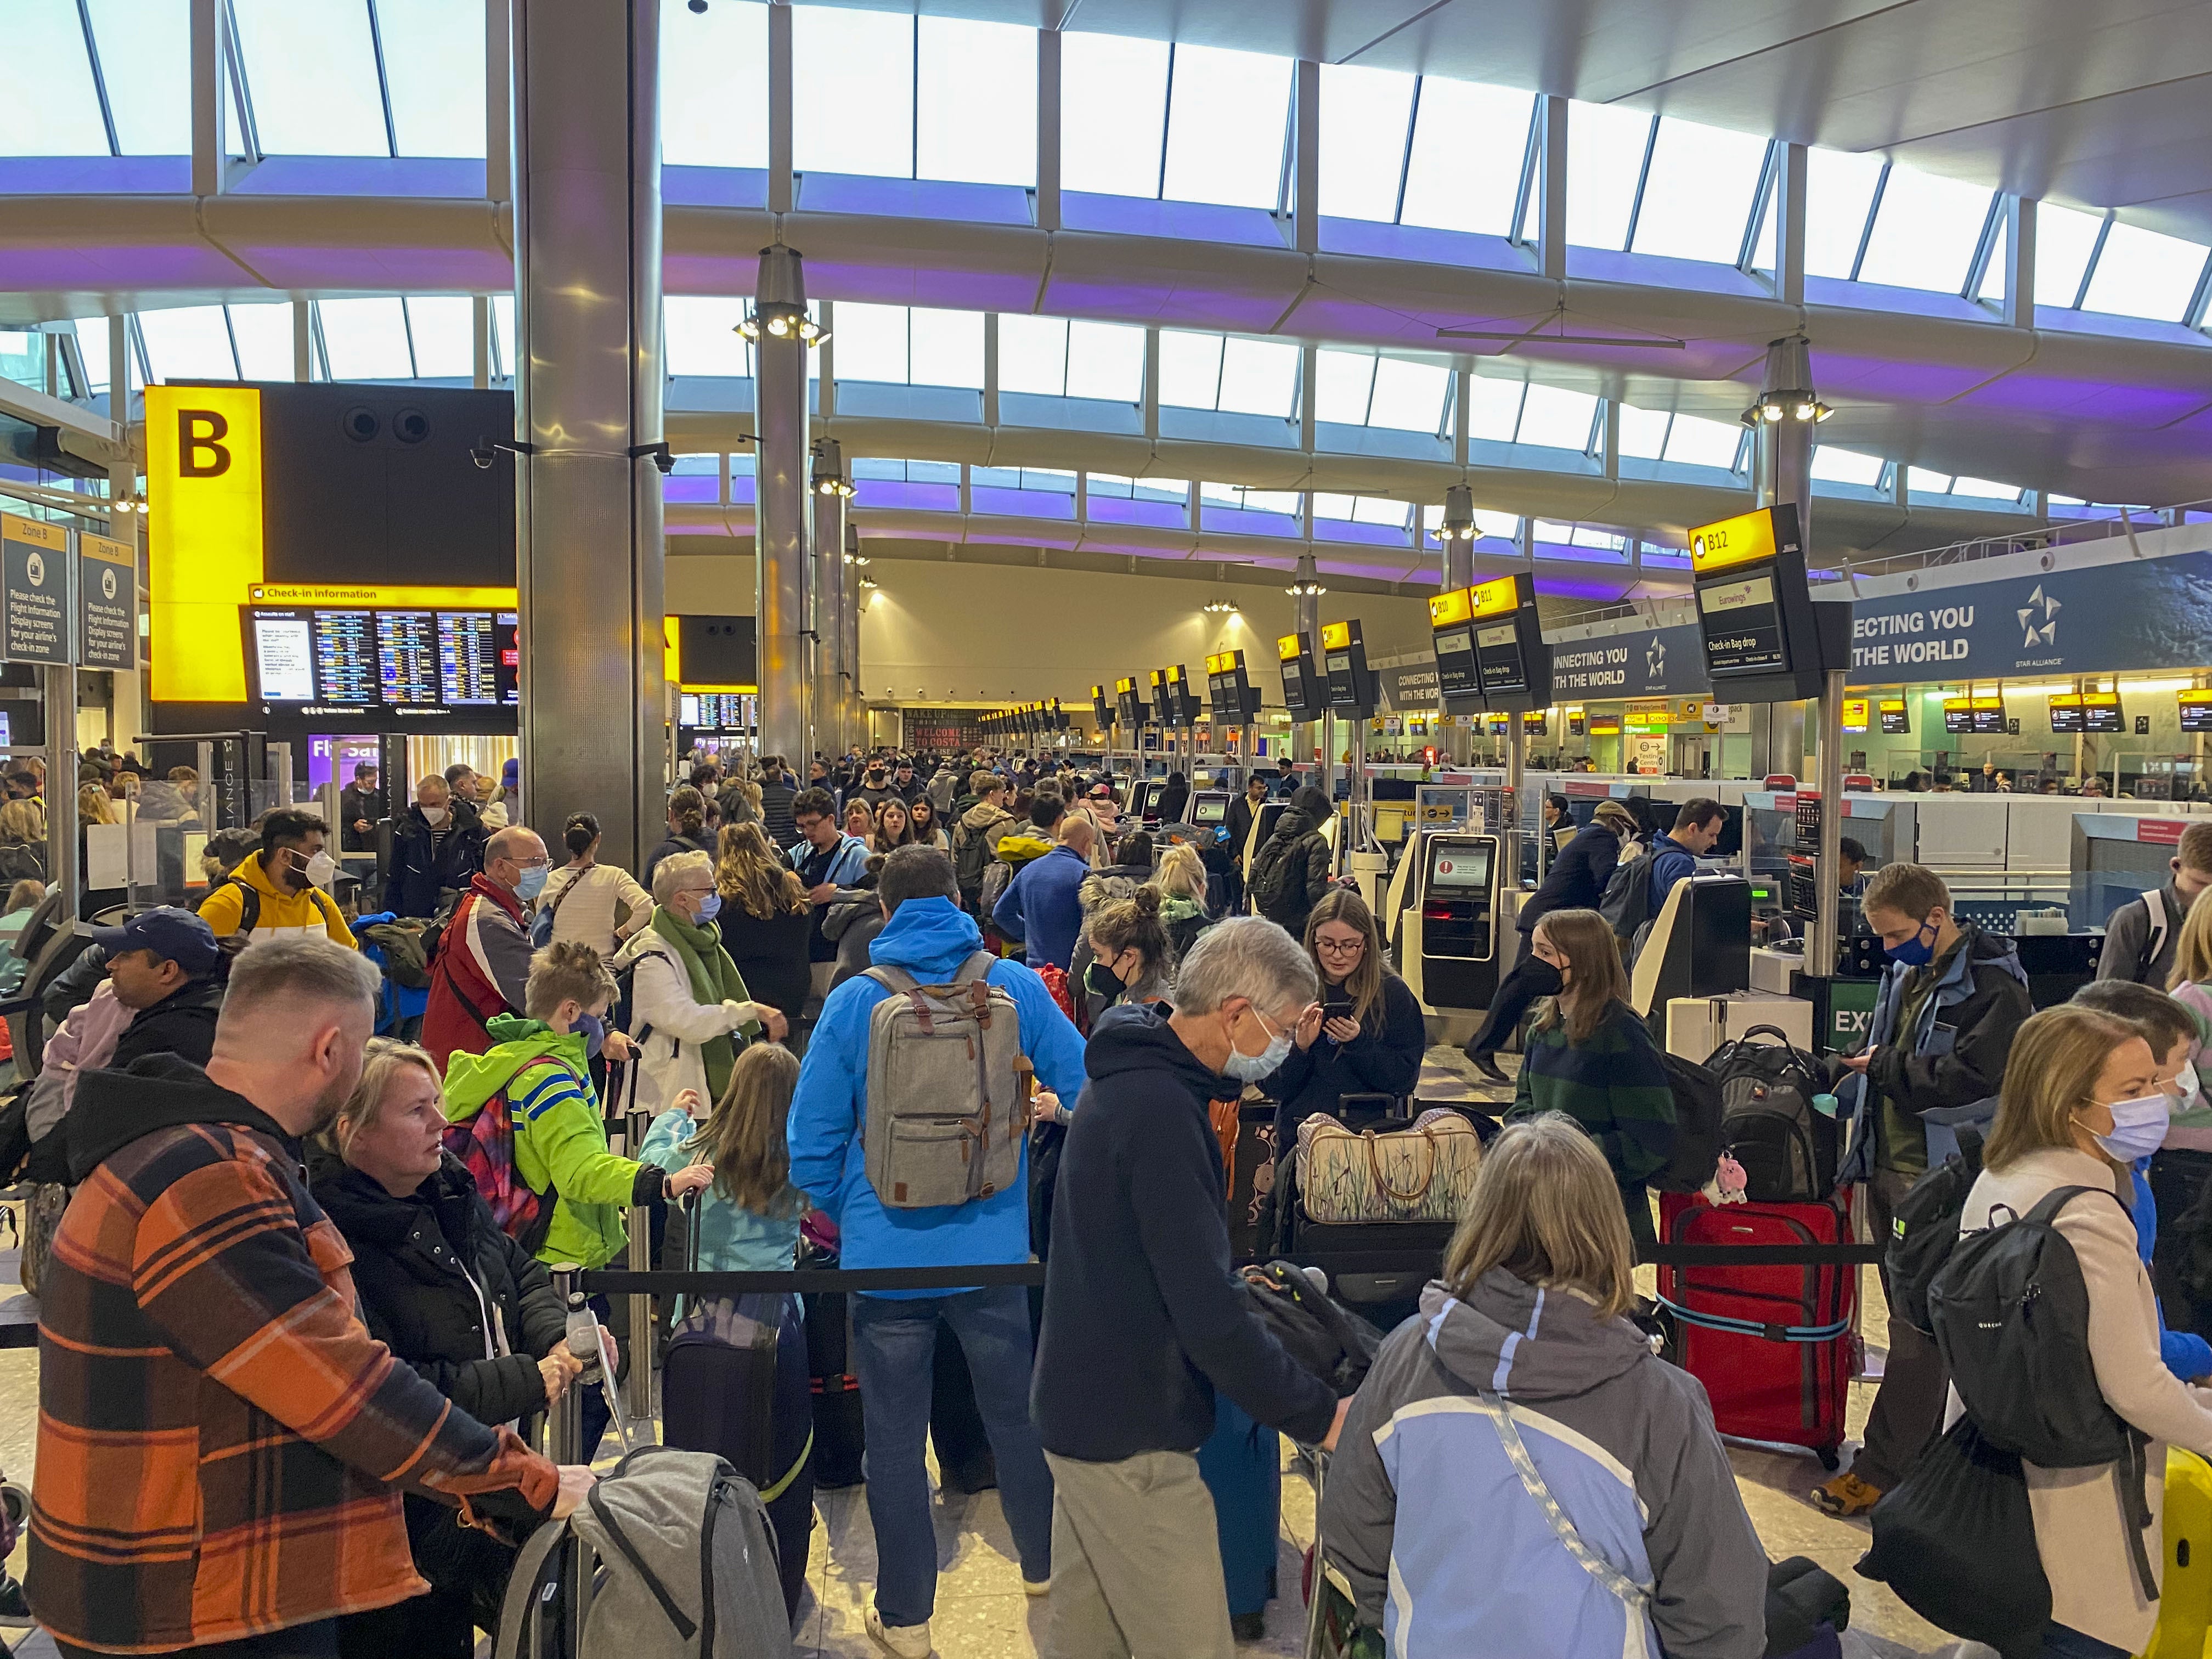 Heathrow airport sees busiest month since the pandemic began